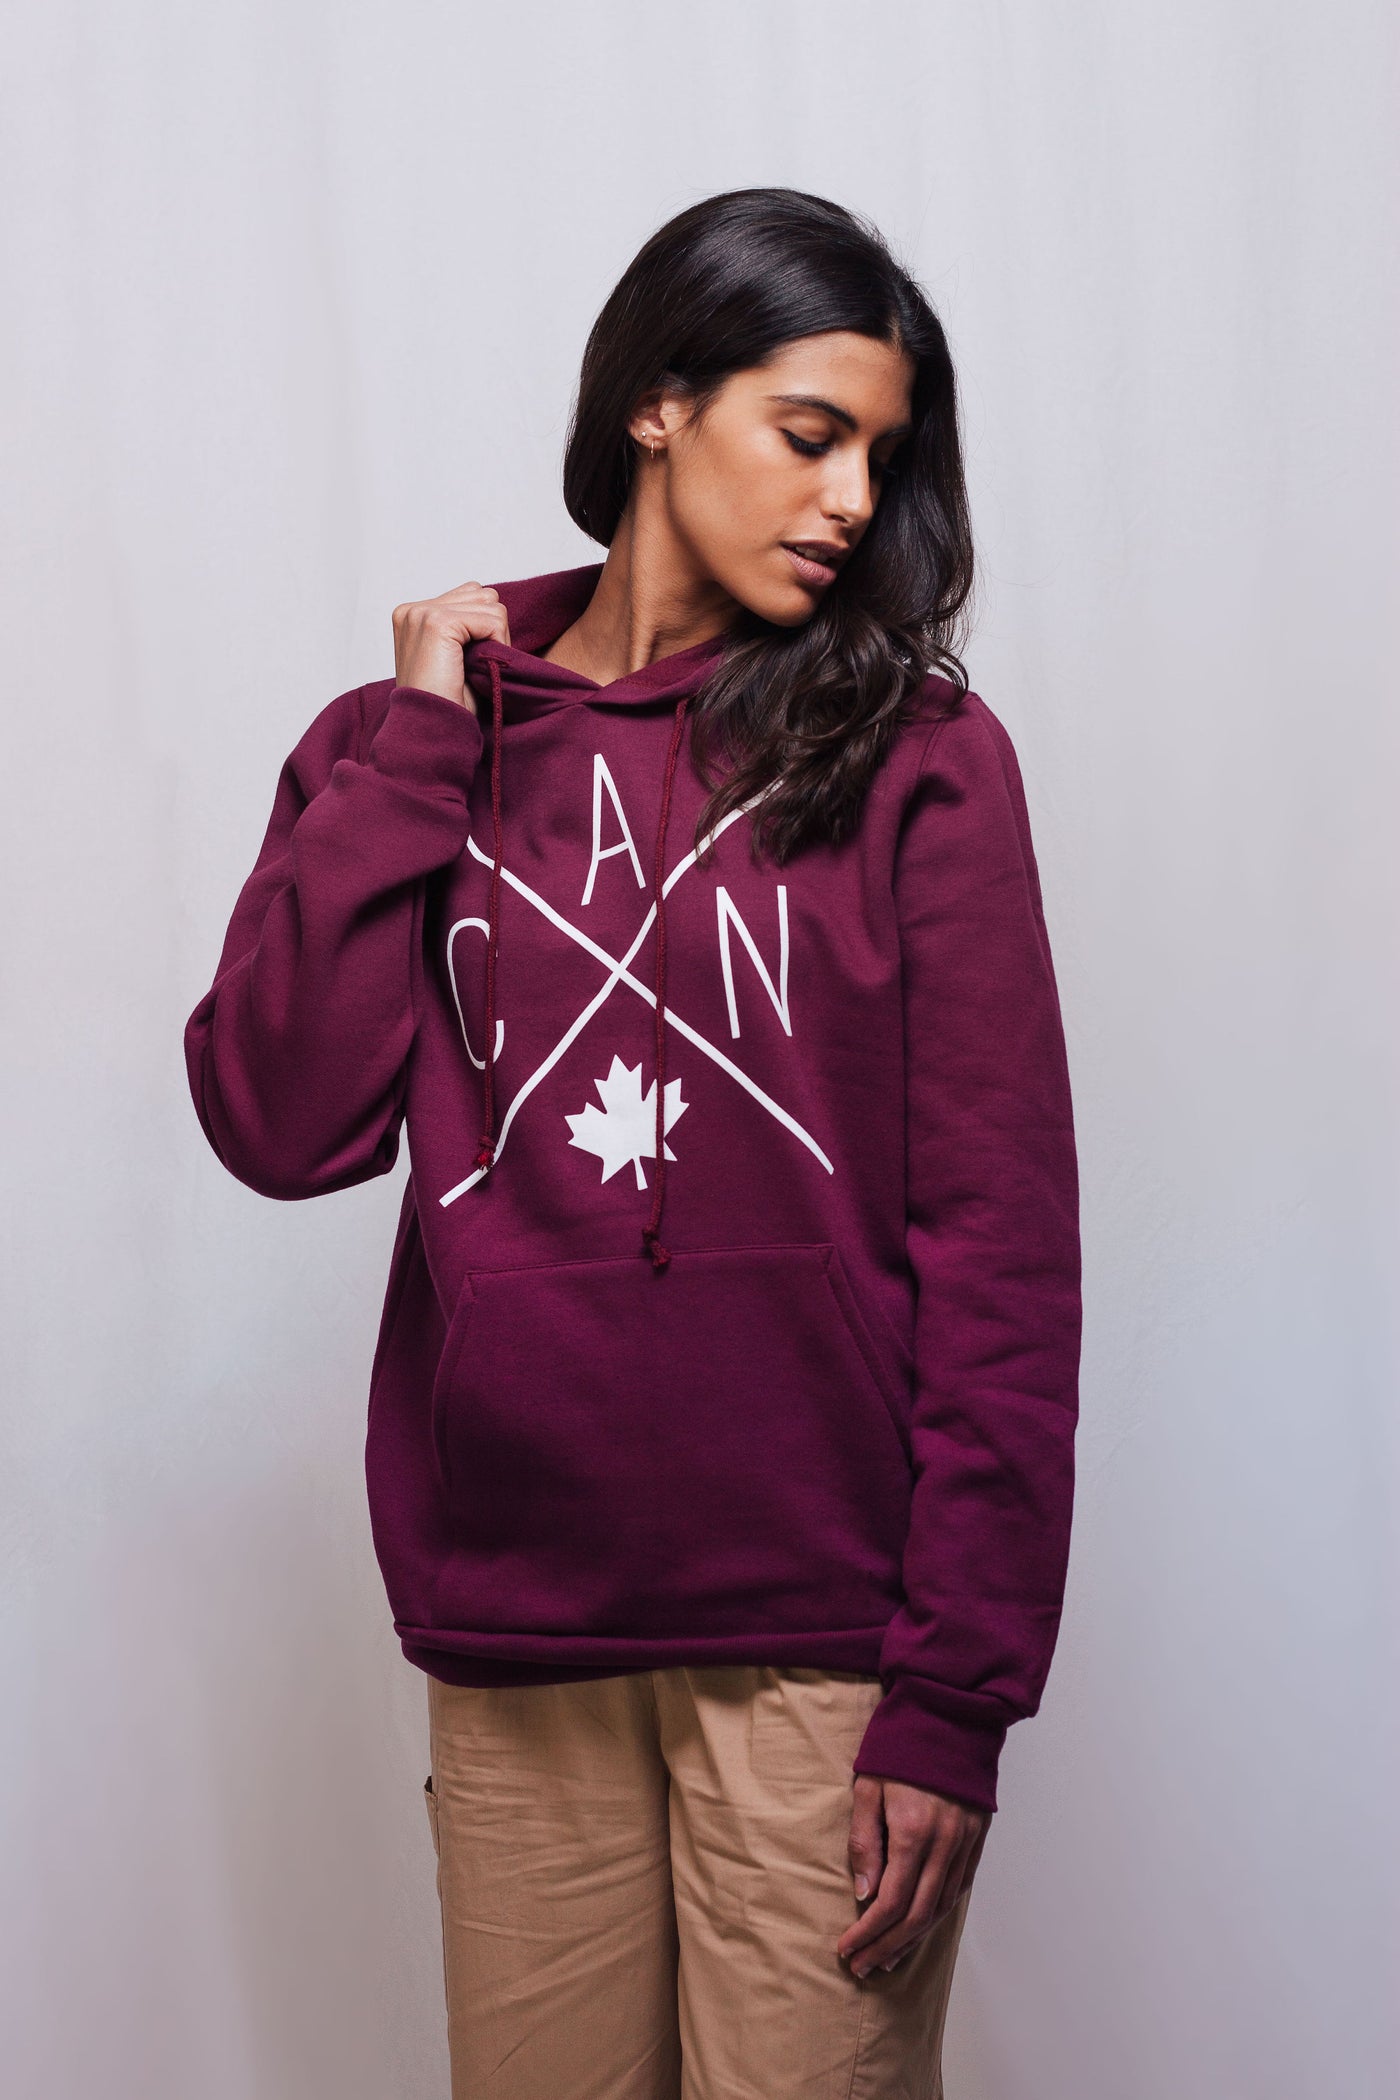 Individual sporting Canadian made hoodie featuring a Local Laundry trademarked CAN Maple Leaf design in limited maroon colour. 